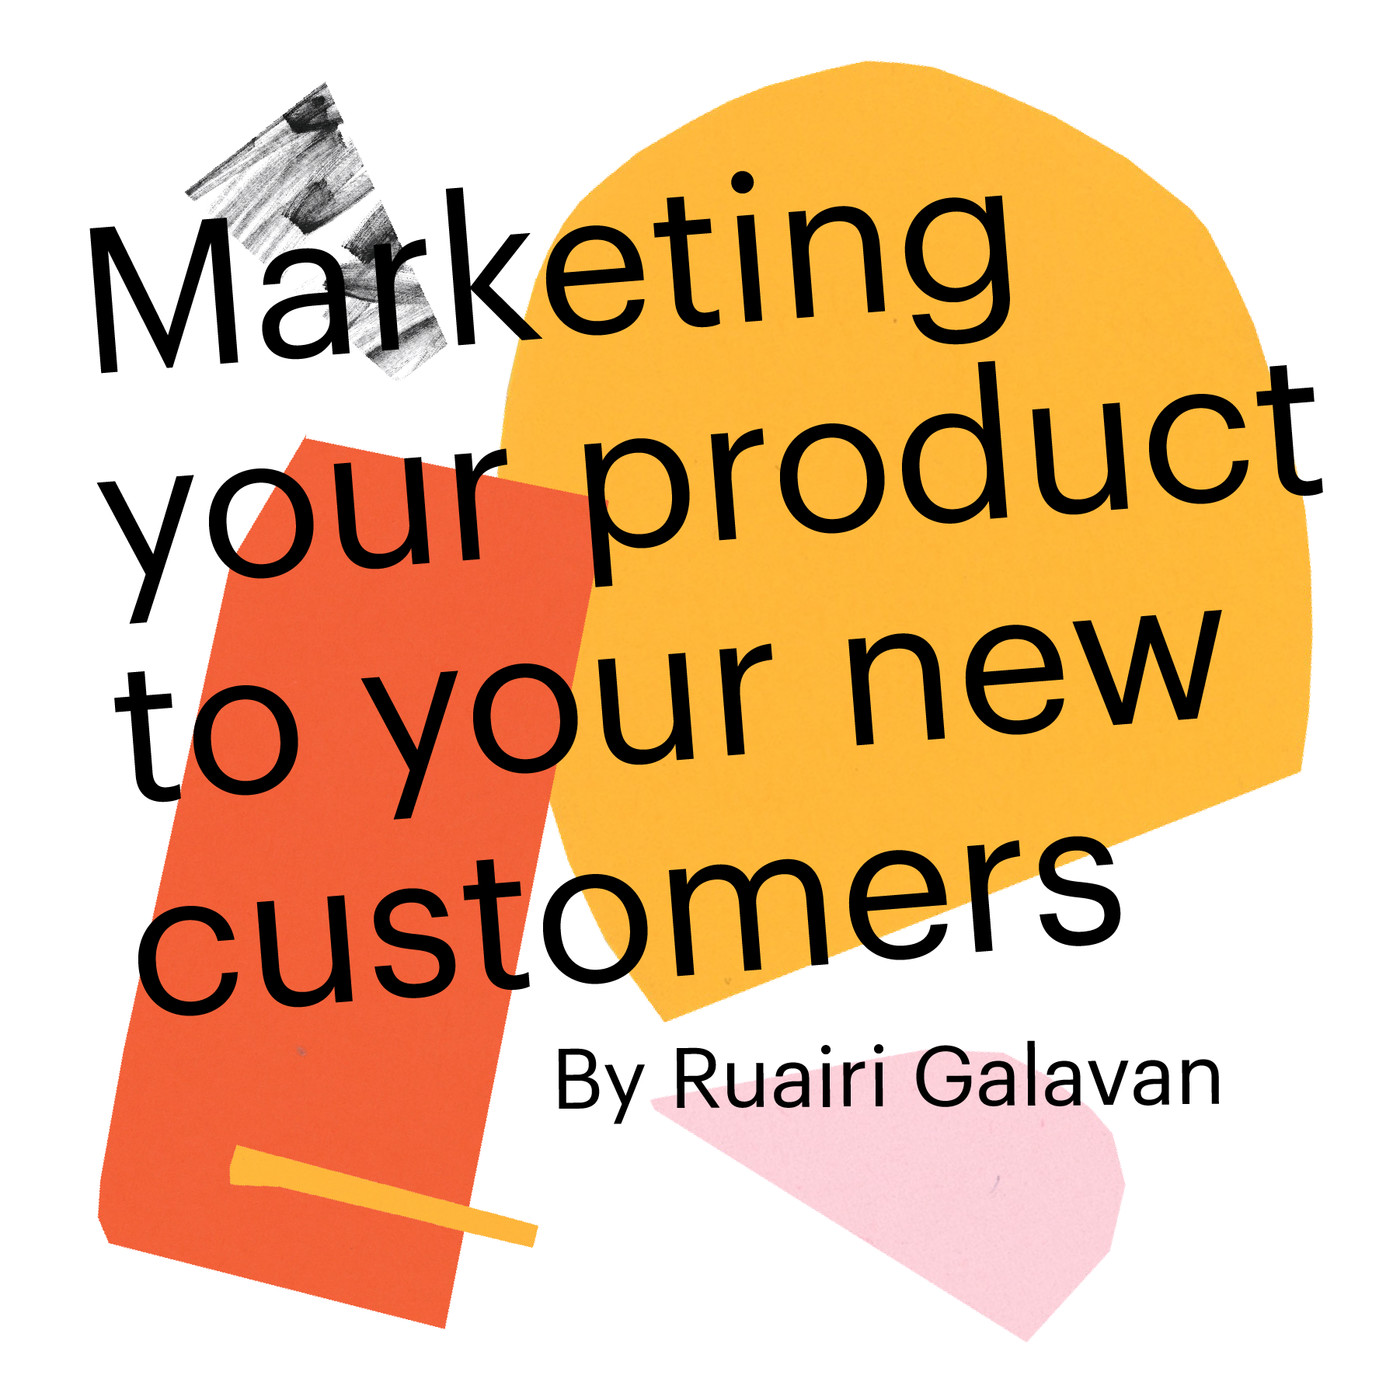 Chapter 13: Marketing your product to new customers